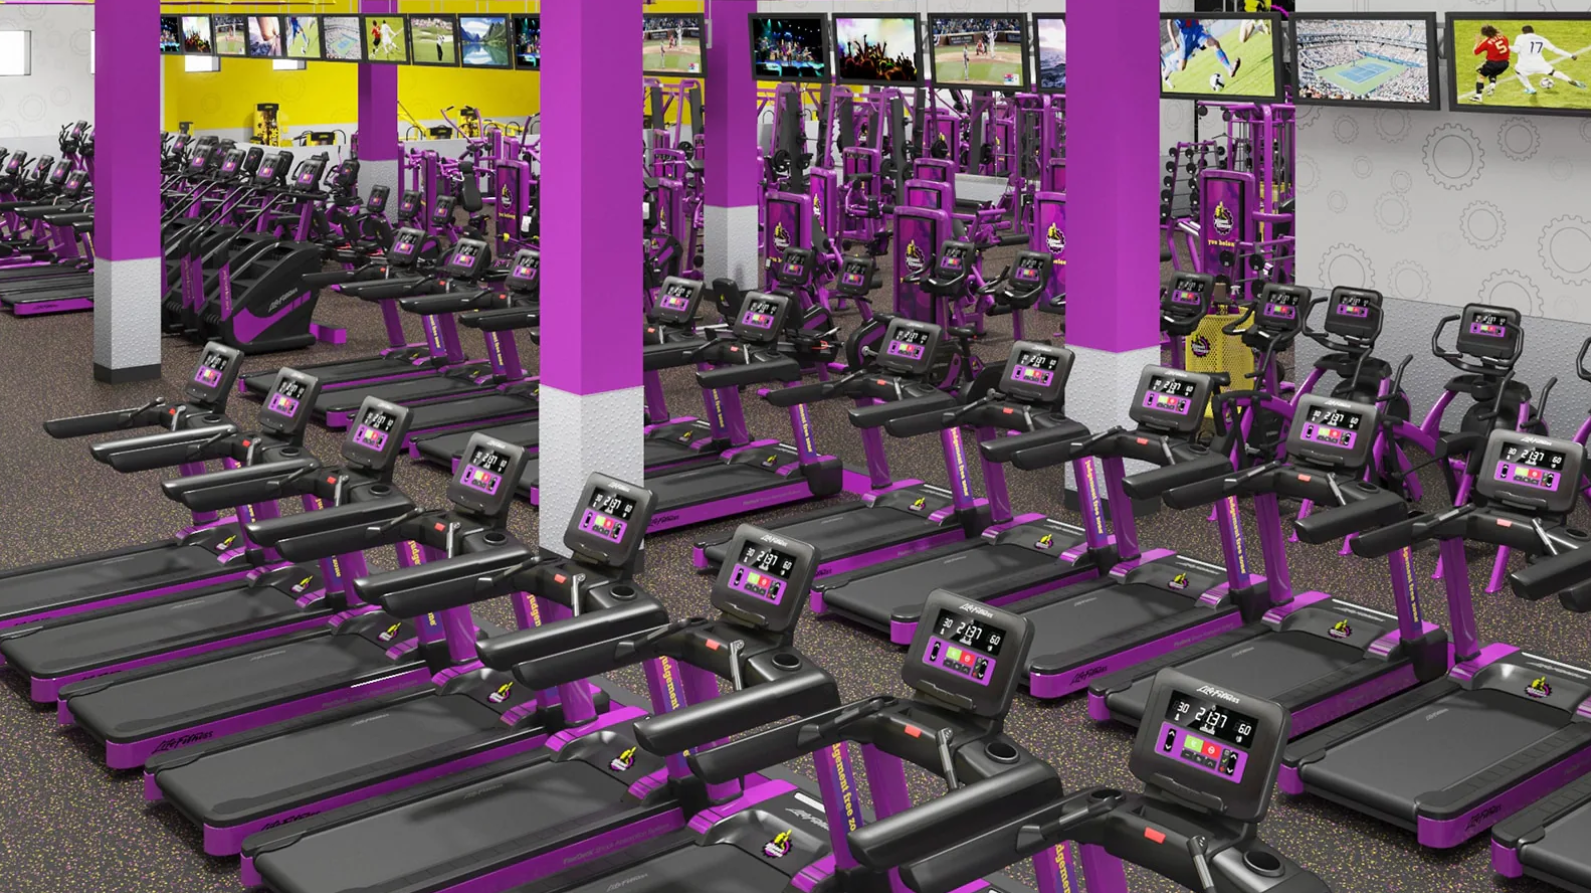 Planet fitness and Big gyms